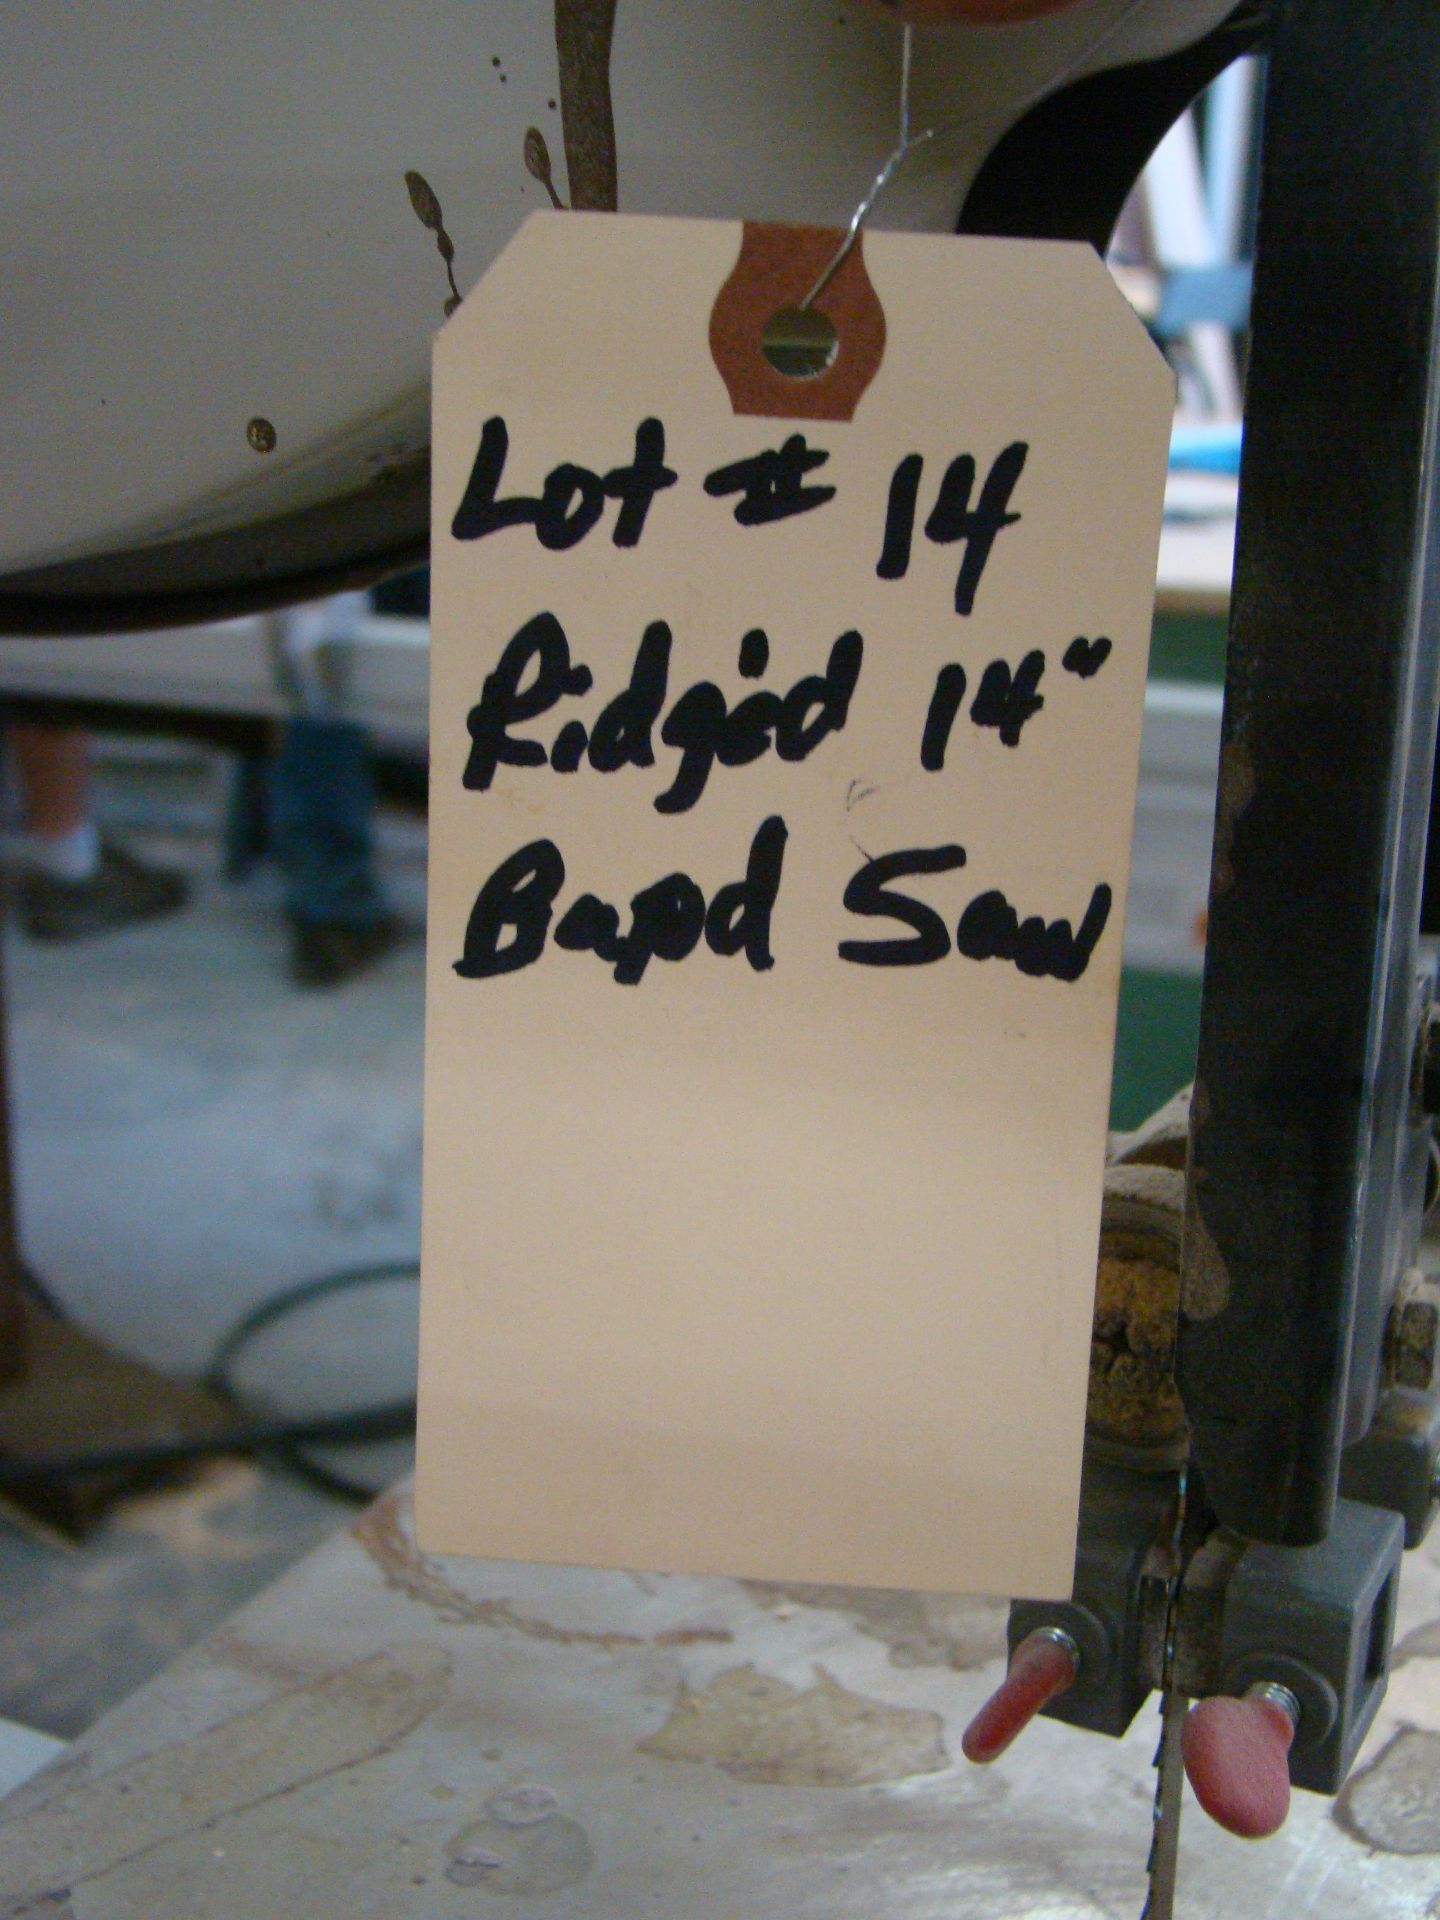 Ridgid 14" Band Saw Model #BS14000 110 volts - Image 3 of 5